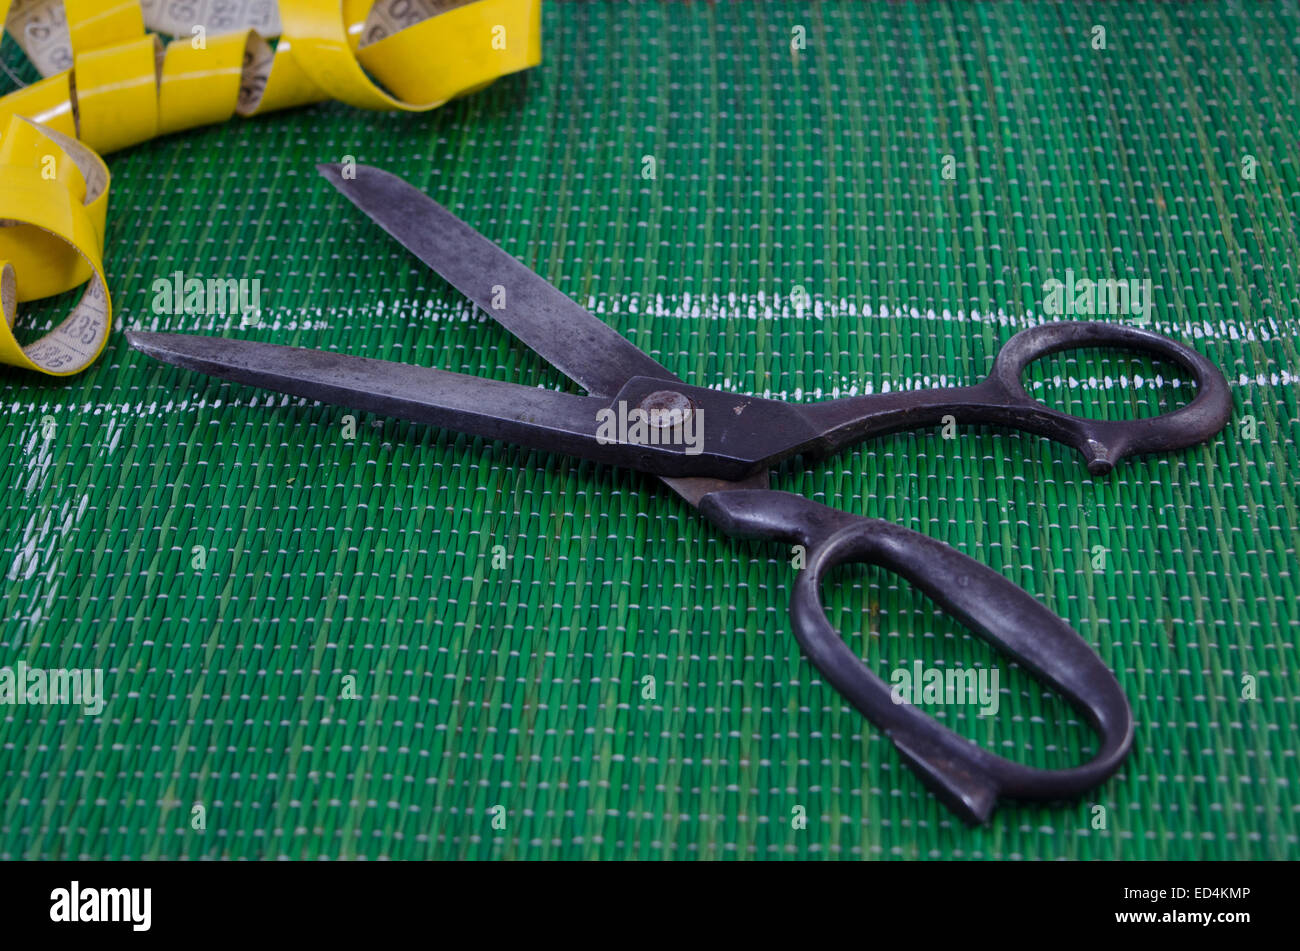 Old scissors and a tape measure on green background Stock Photo